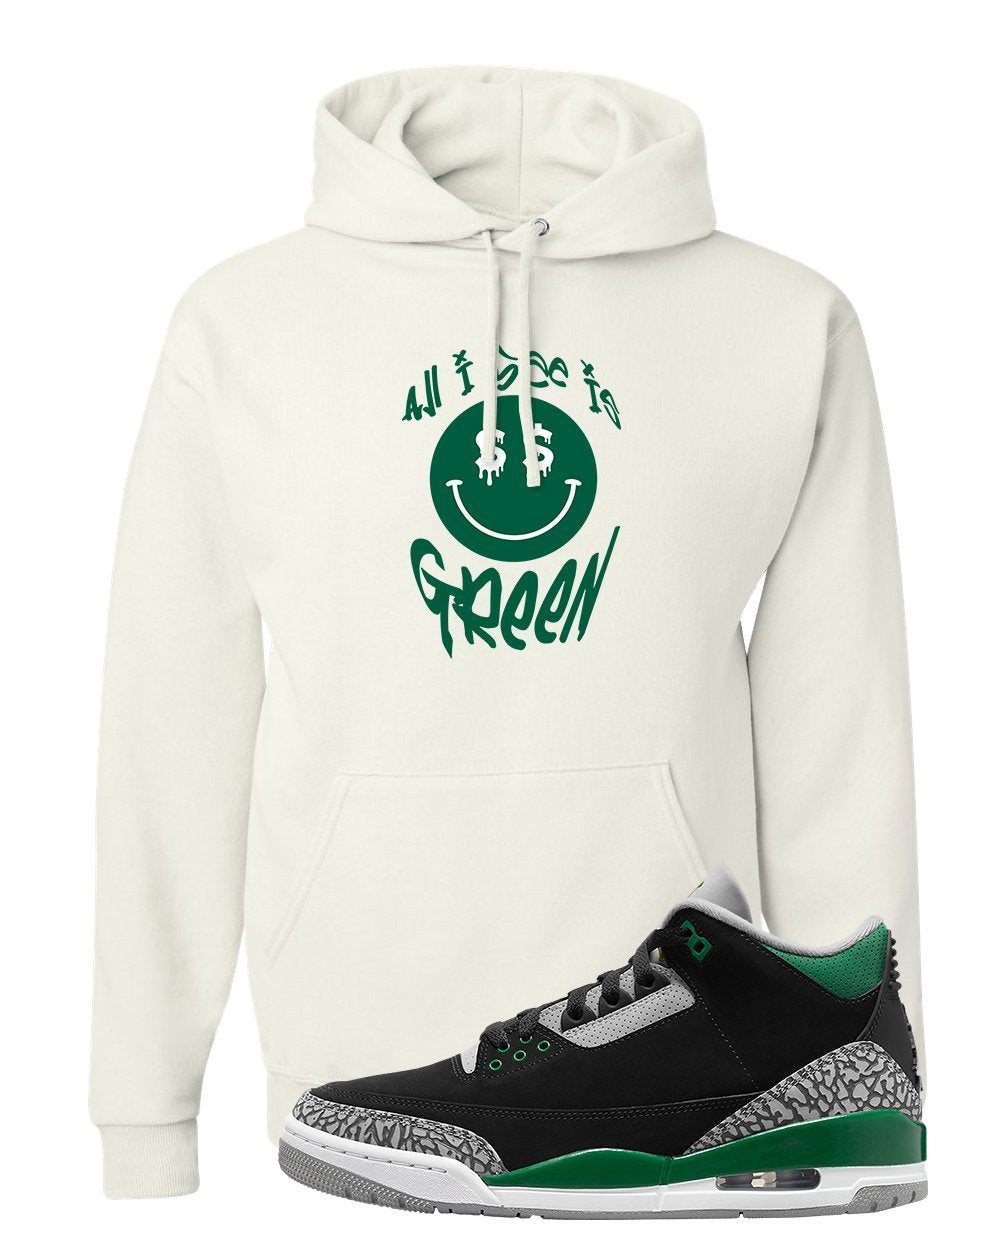 Pine Green 3s Hoodie | All I See Is Green, White